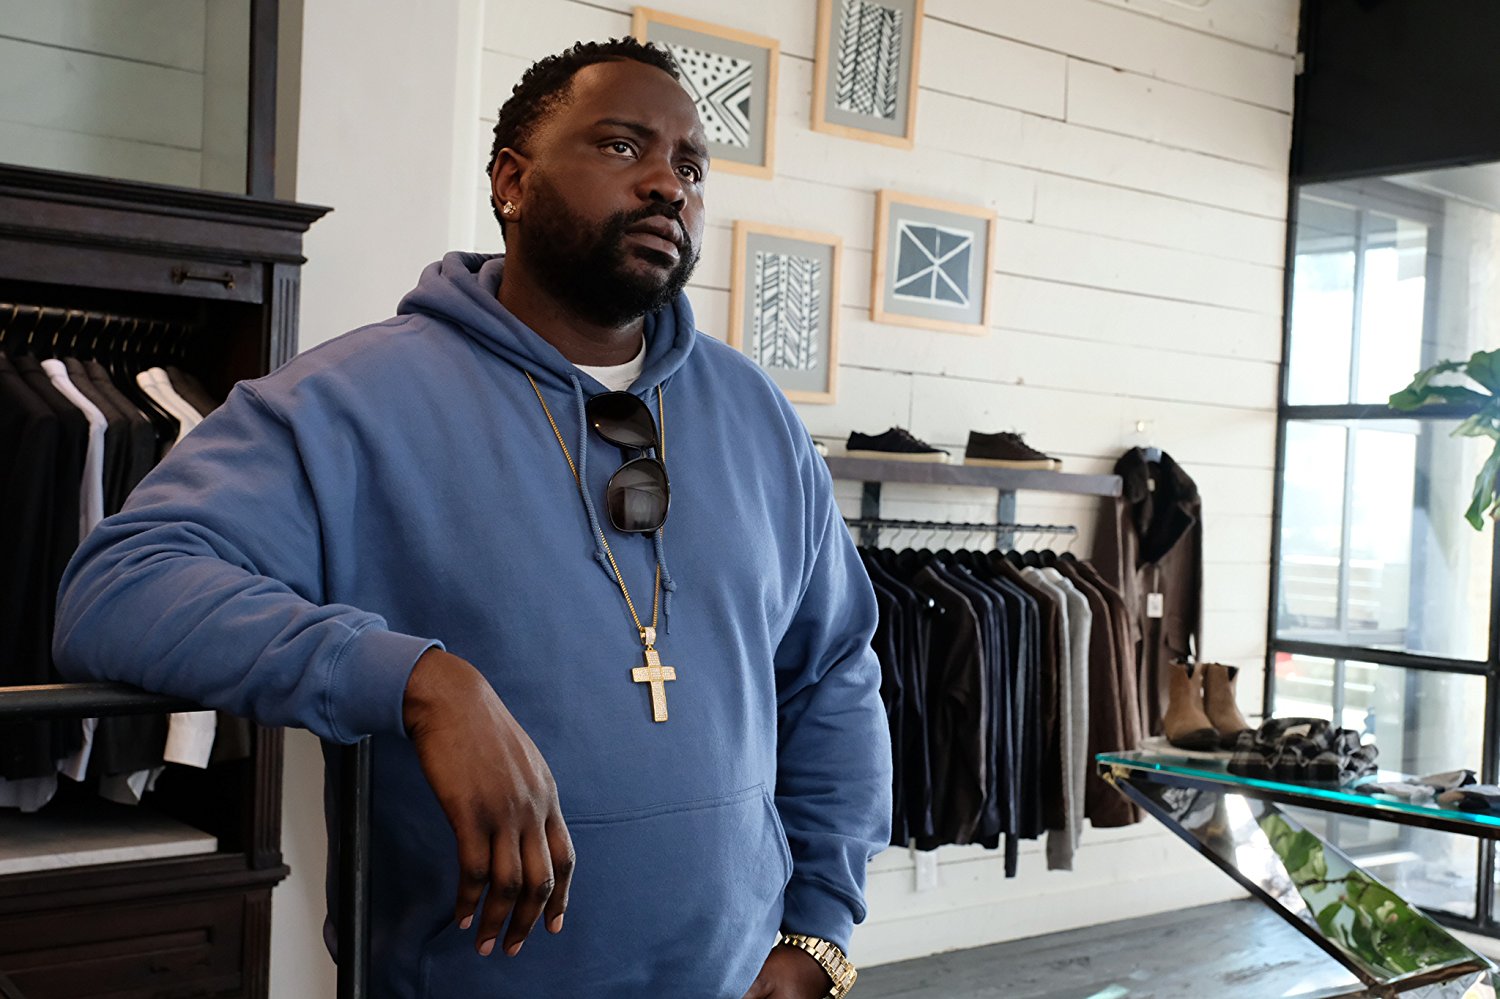 Brian Tyree Henry in "Woods"